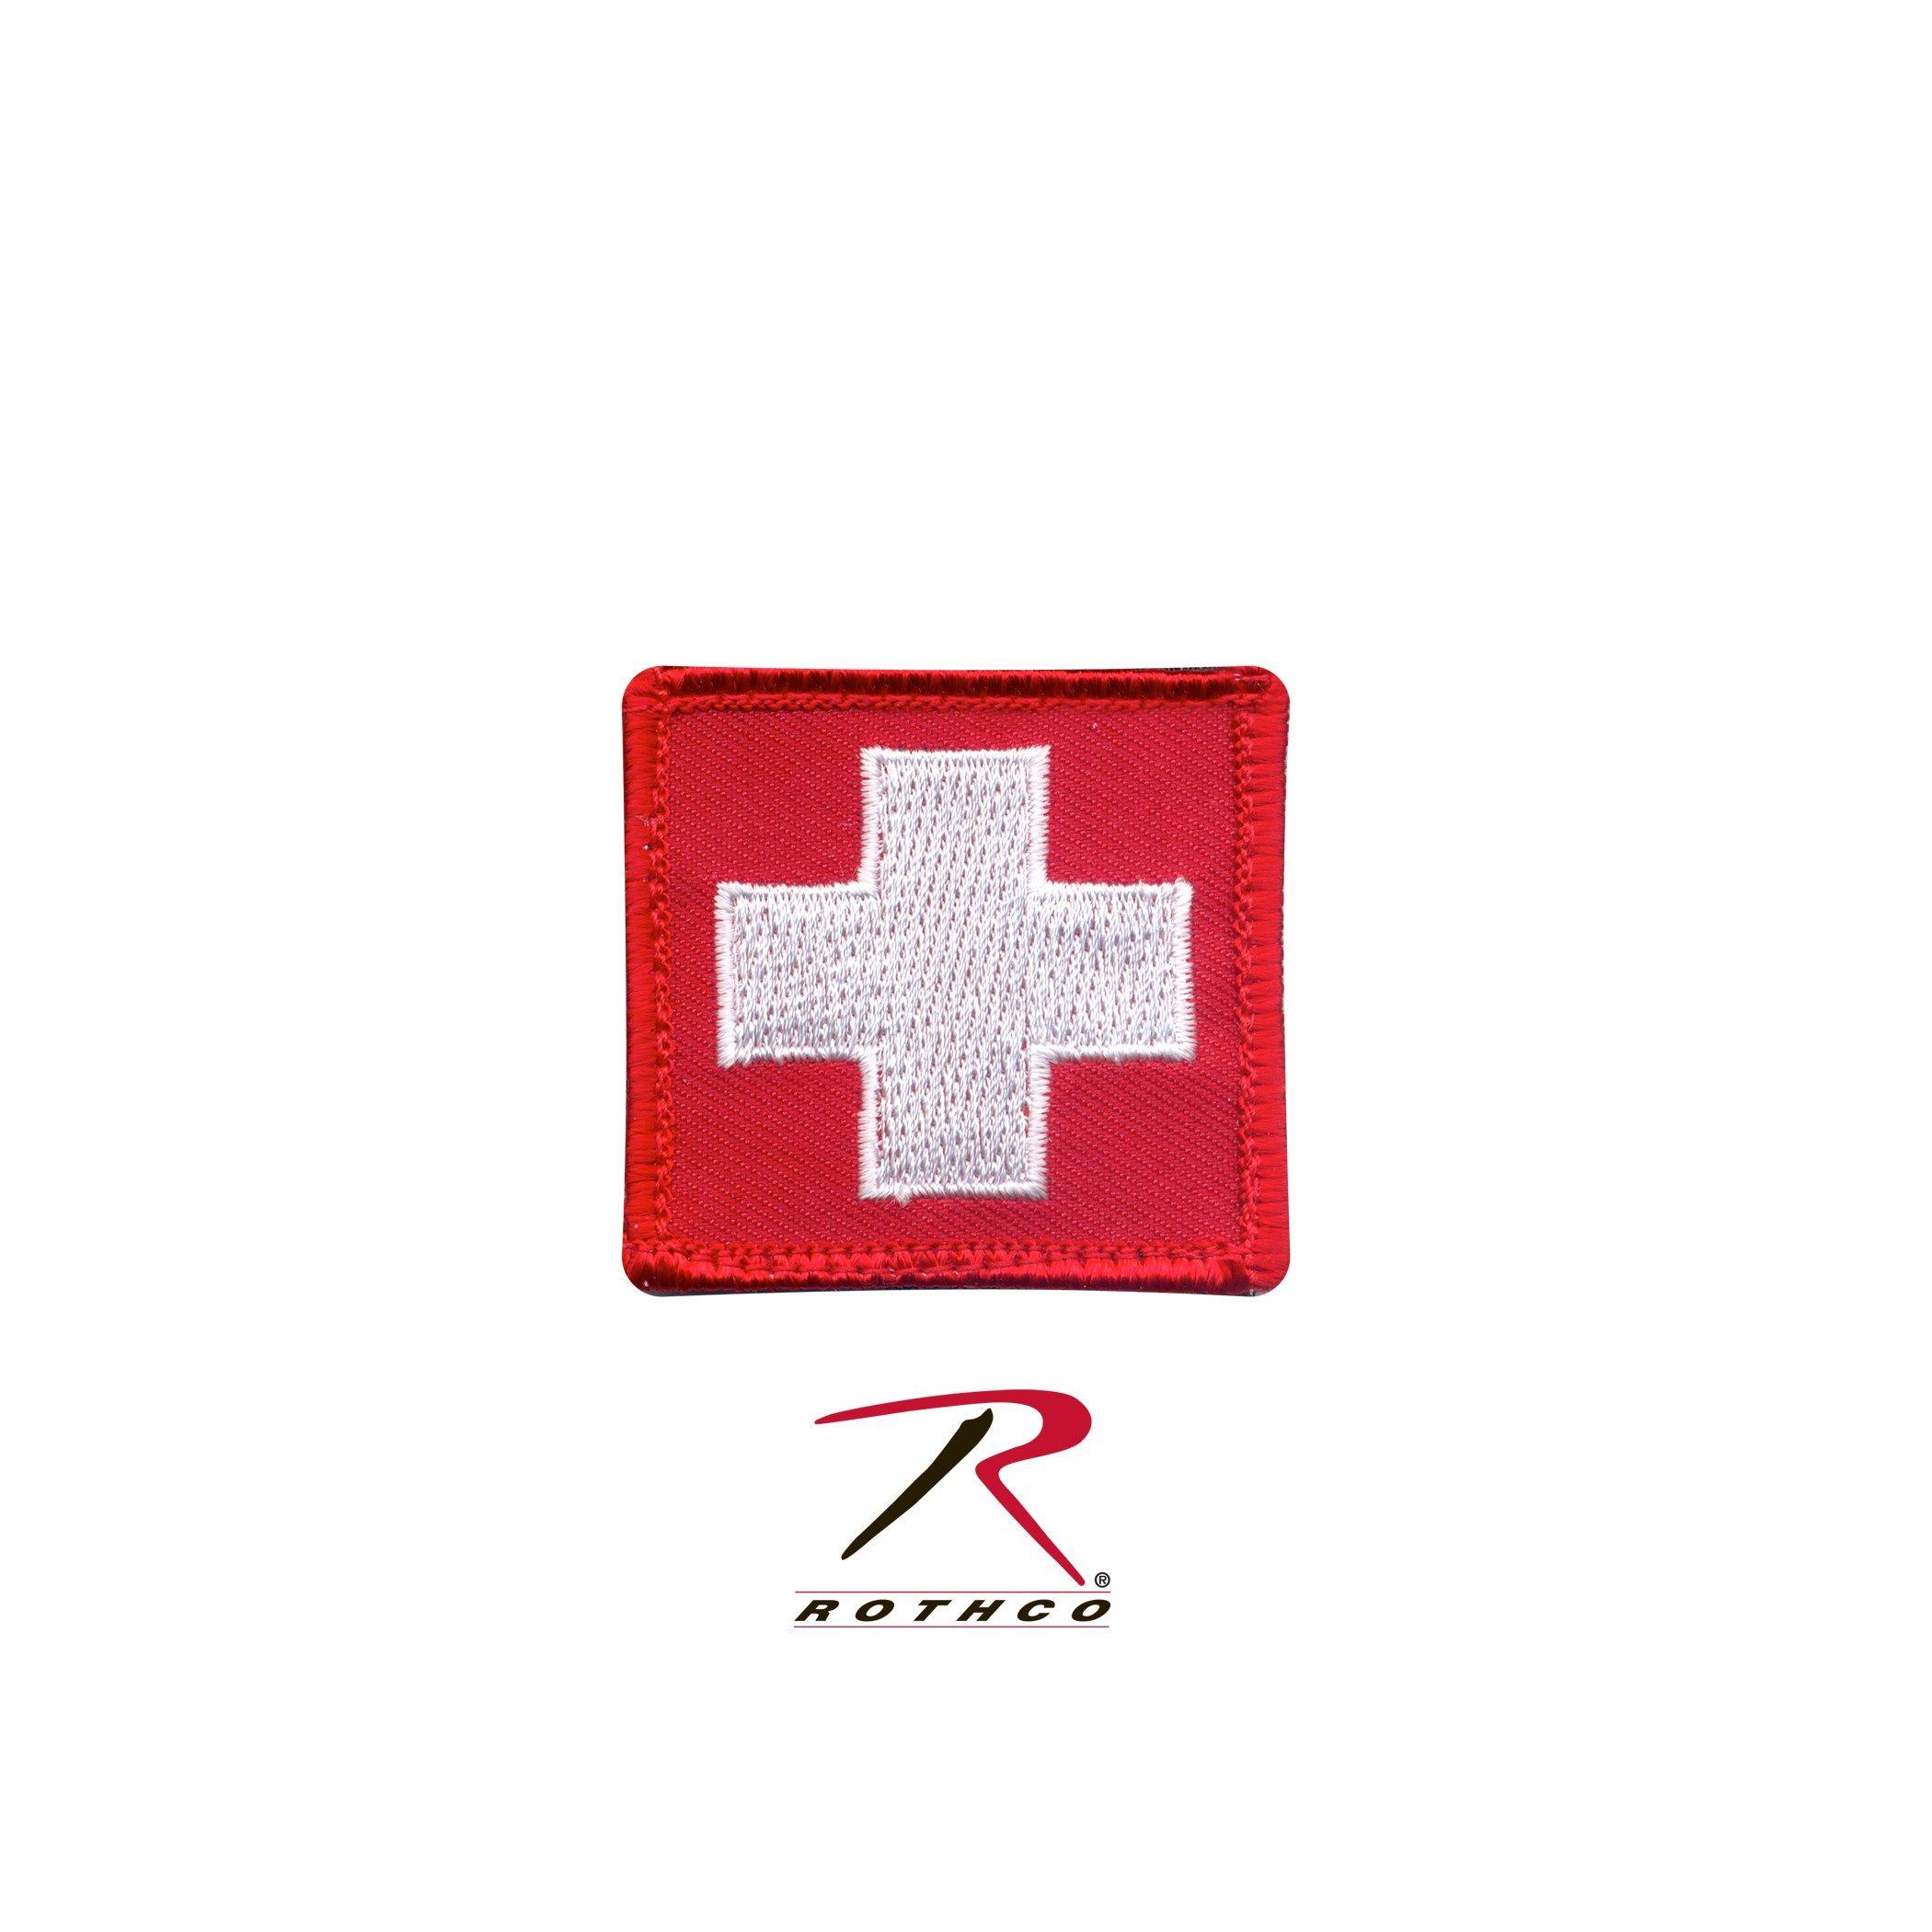 White Cross with Red Shield Logo - White Cross Red Shield Logo